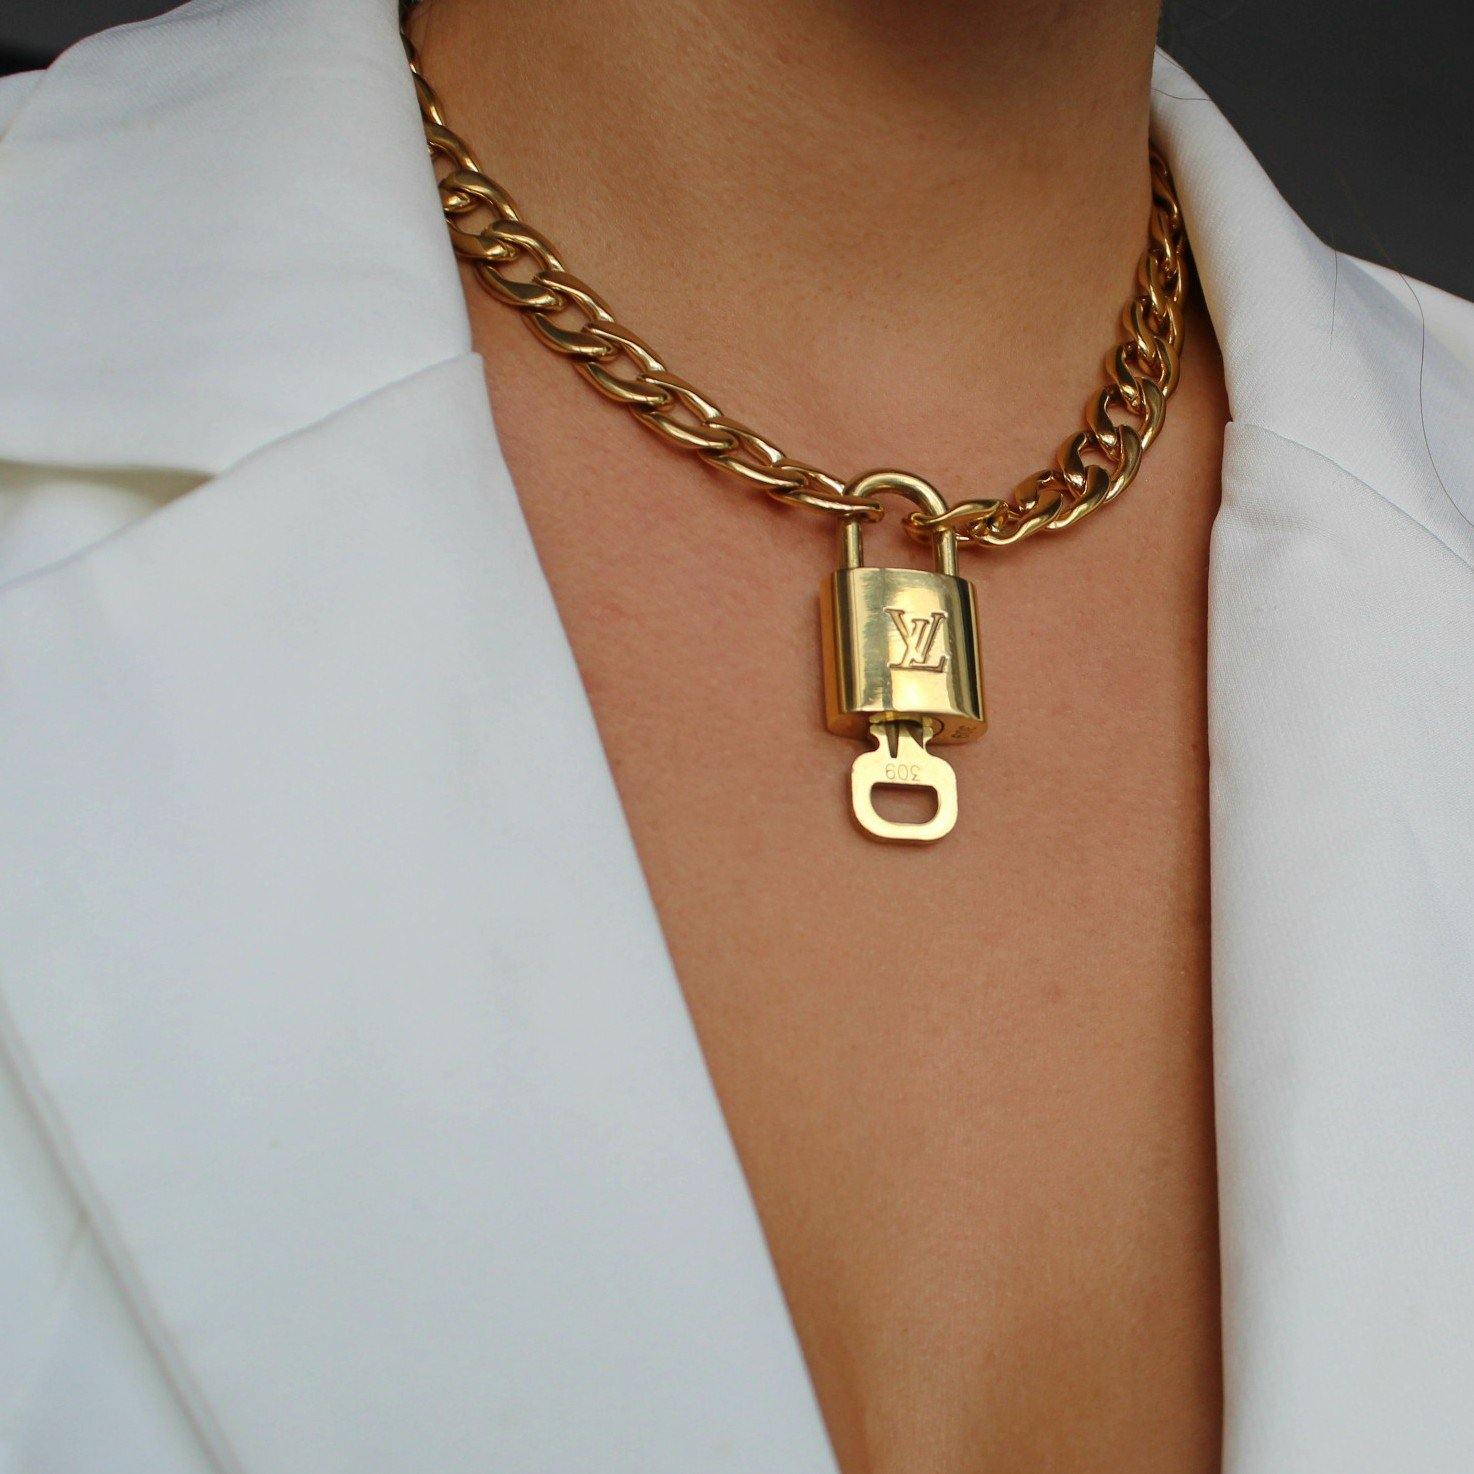 Reworked Vintage Chunky Louis Vuitton Padlock Necklace Silver Necklace